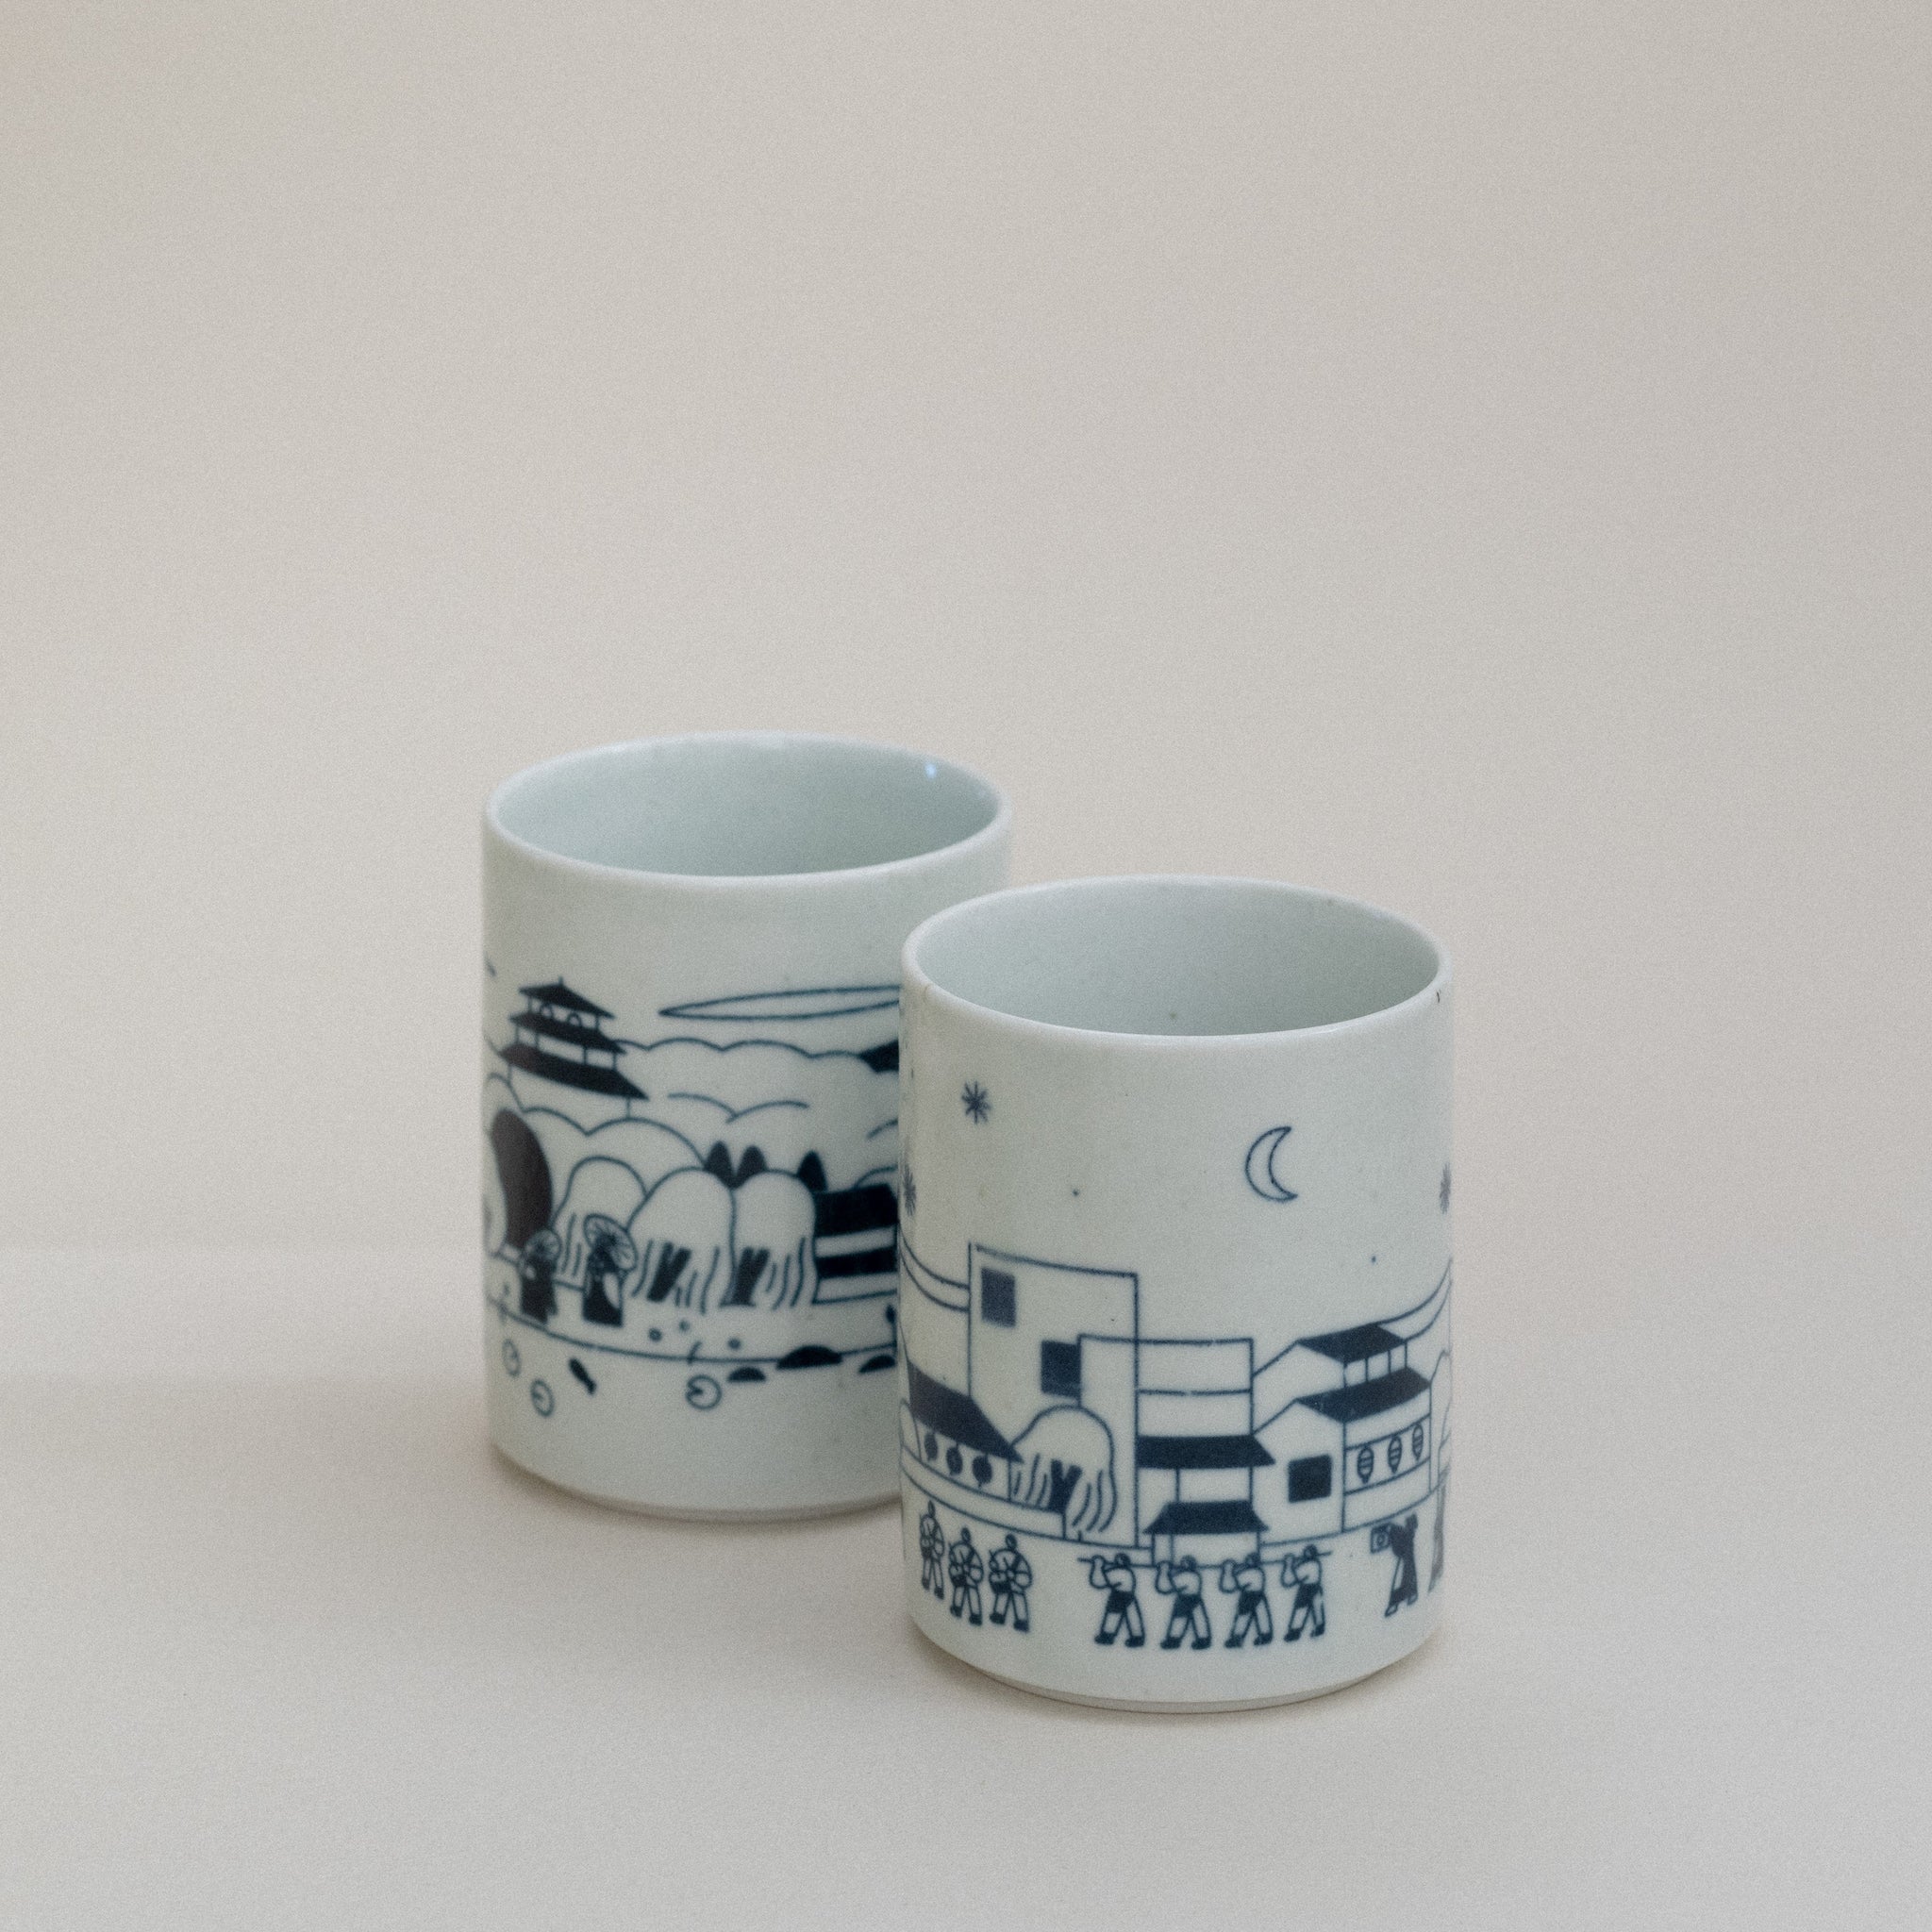 Yunomi Cup – Starry Night